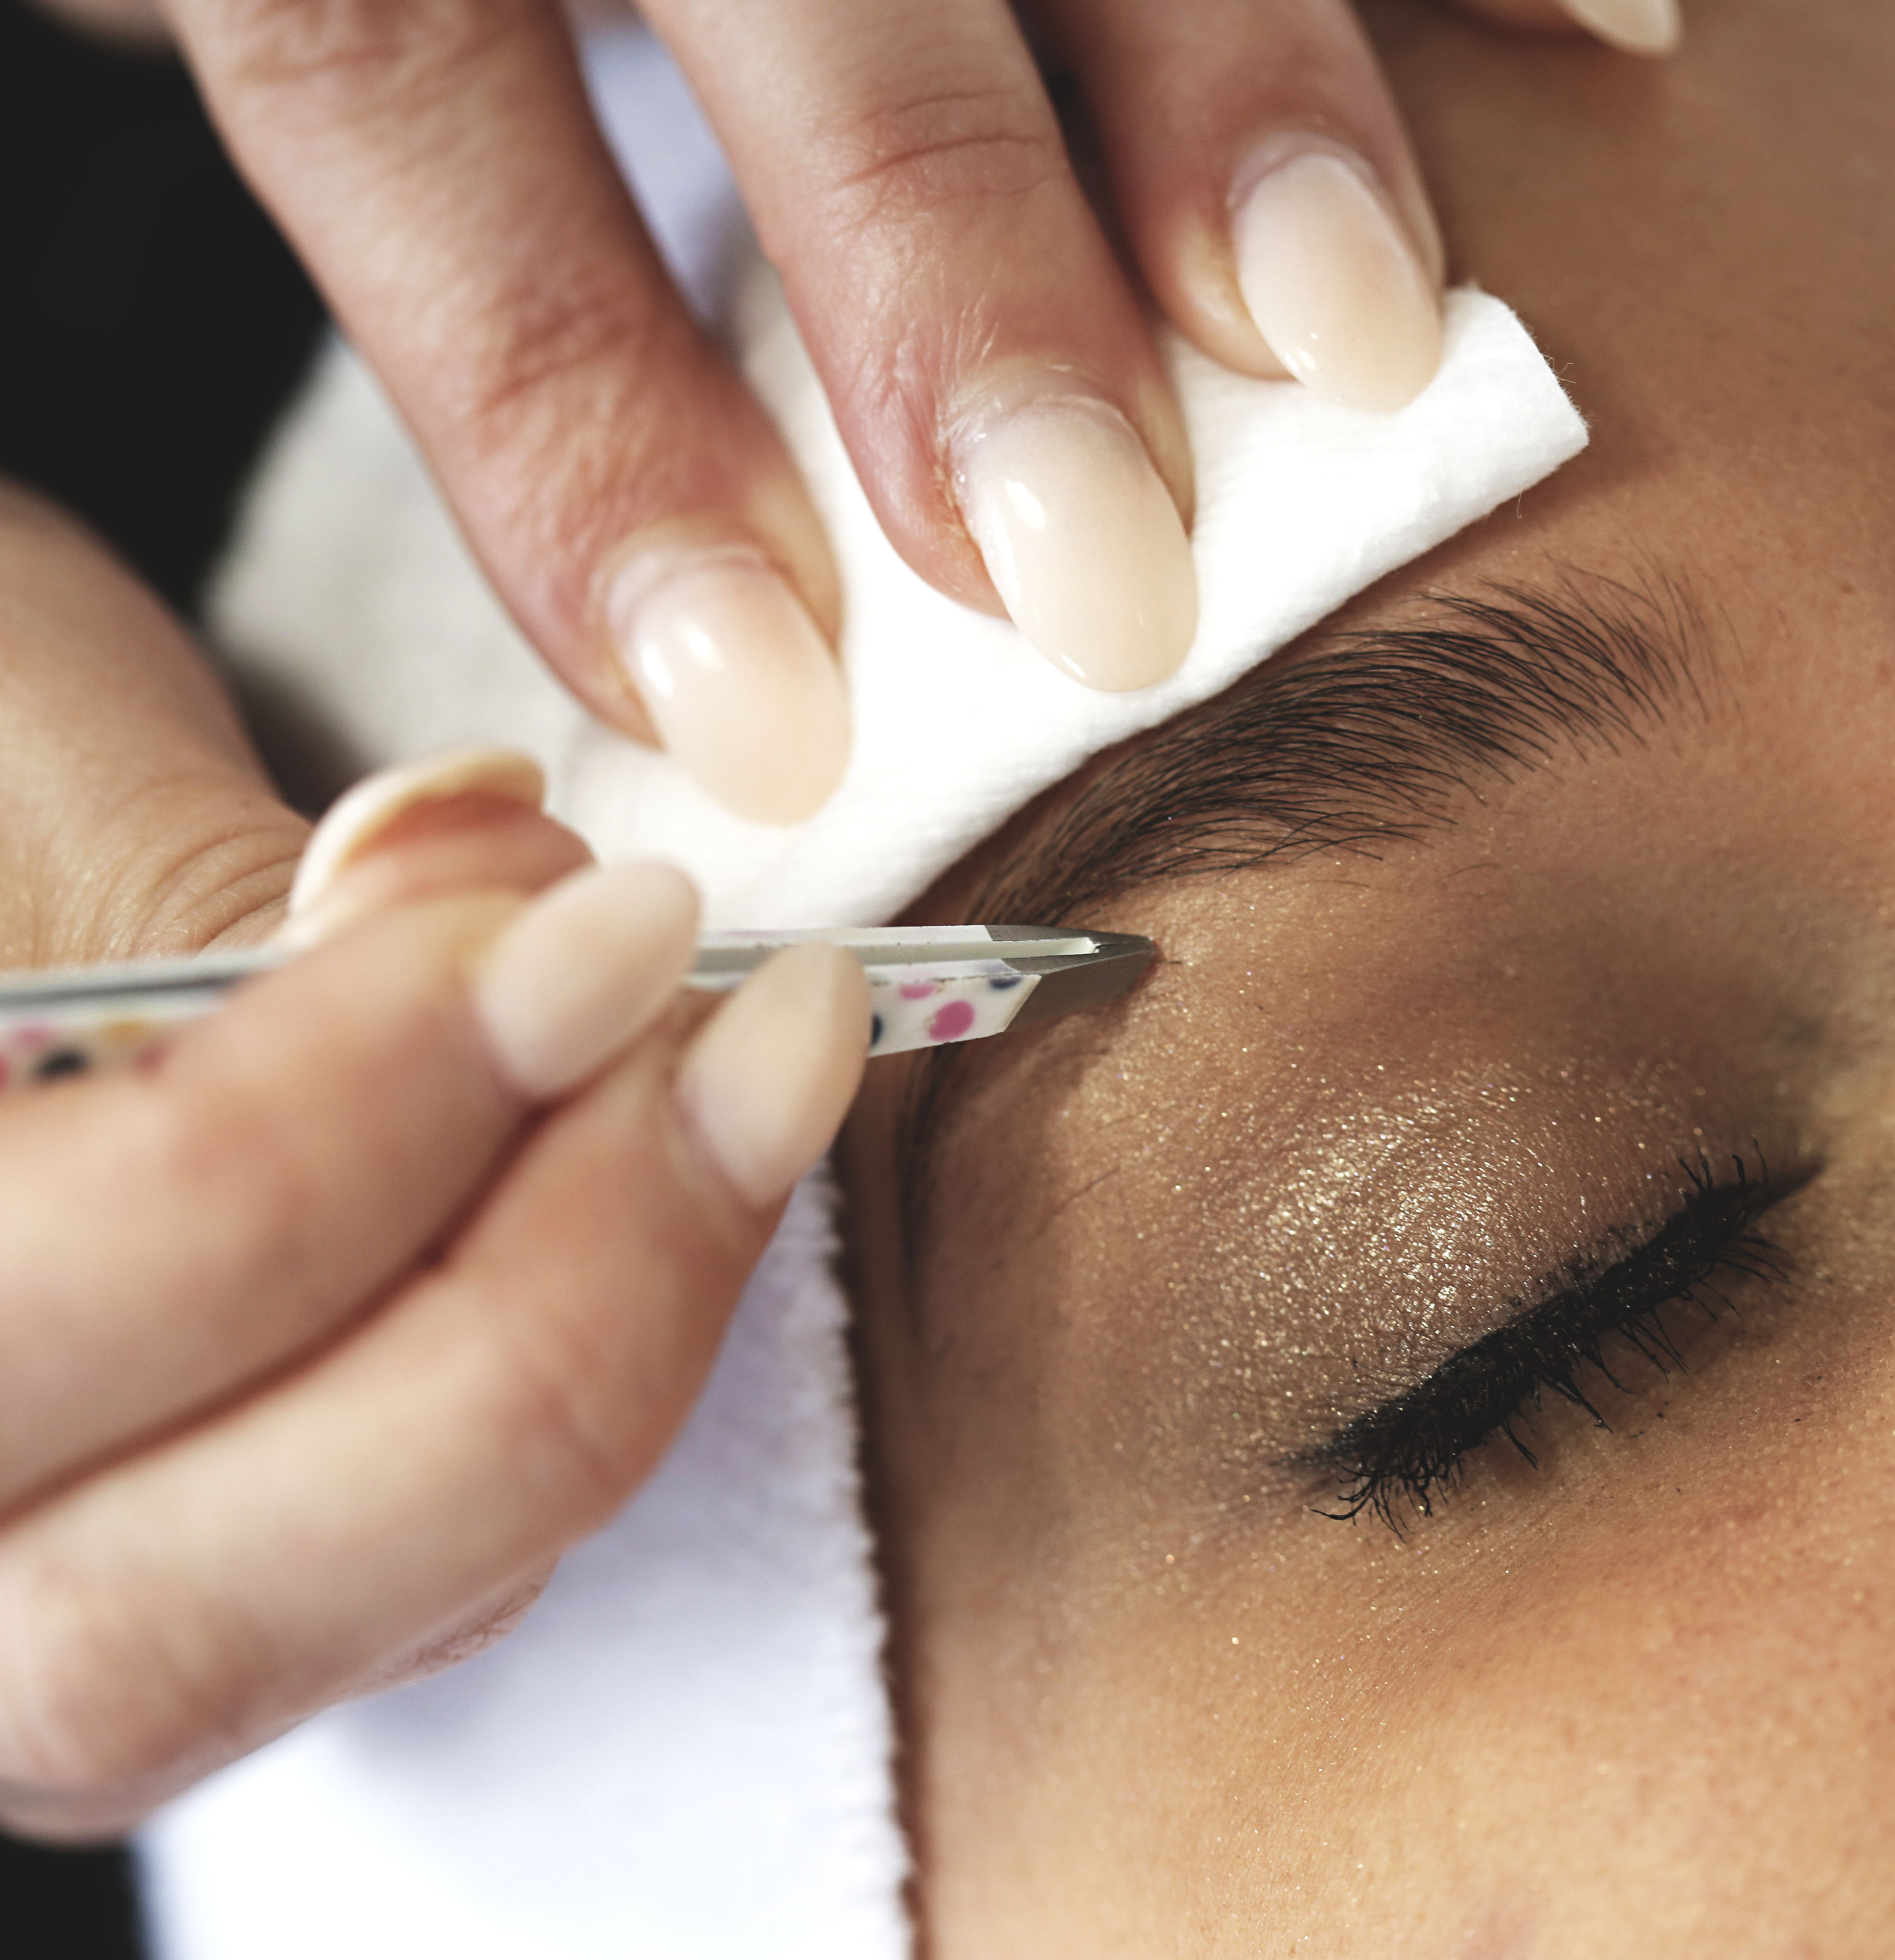 contour day spa brow tinting and wax